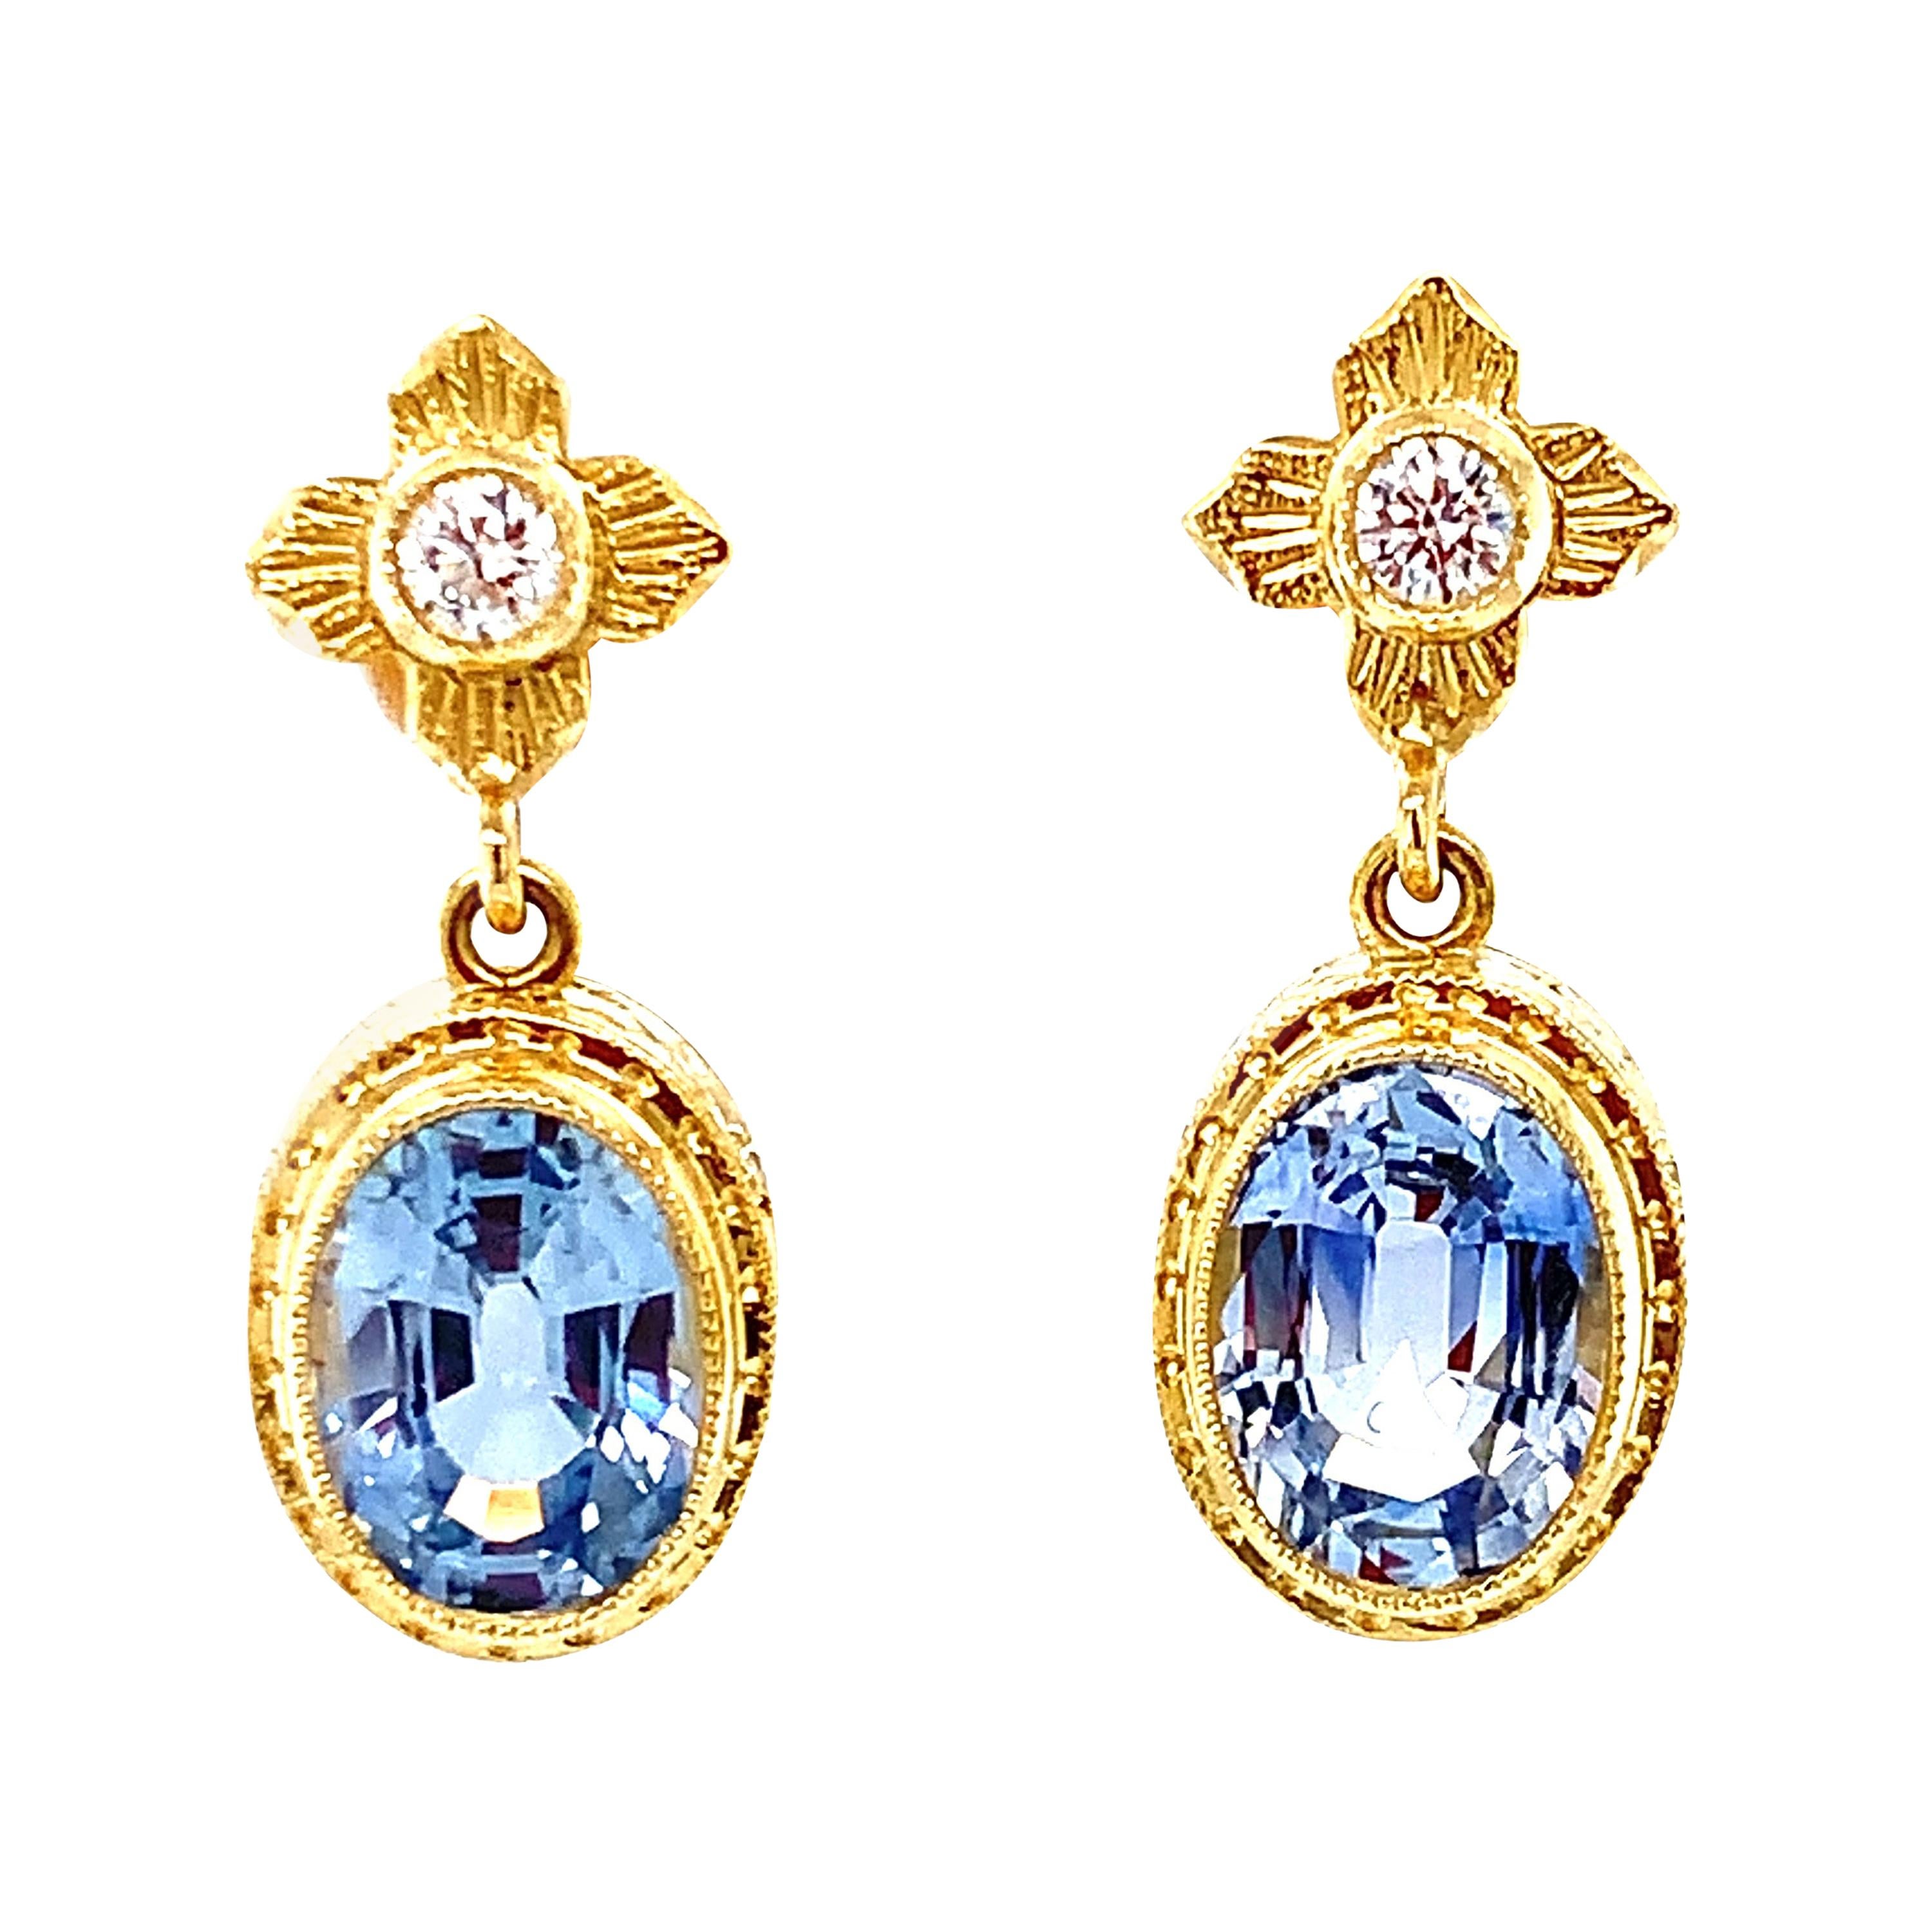 These elegant and sophisticated drop earrings feature brilliant 